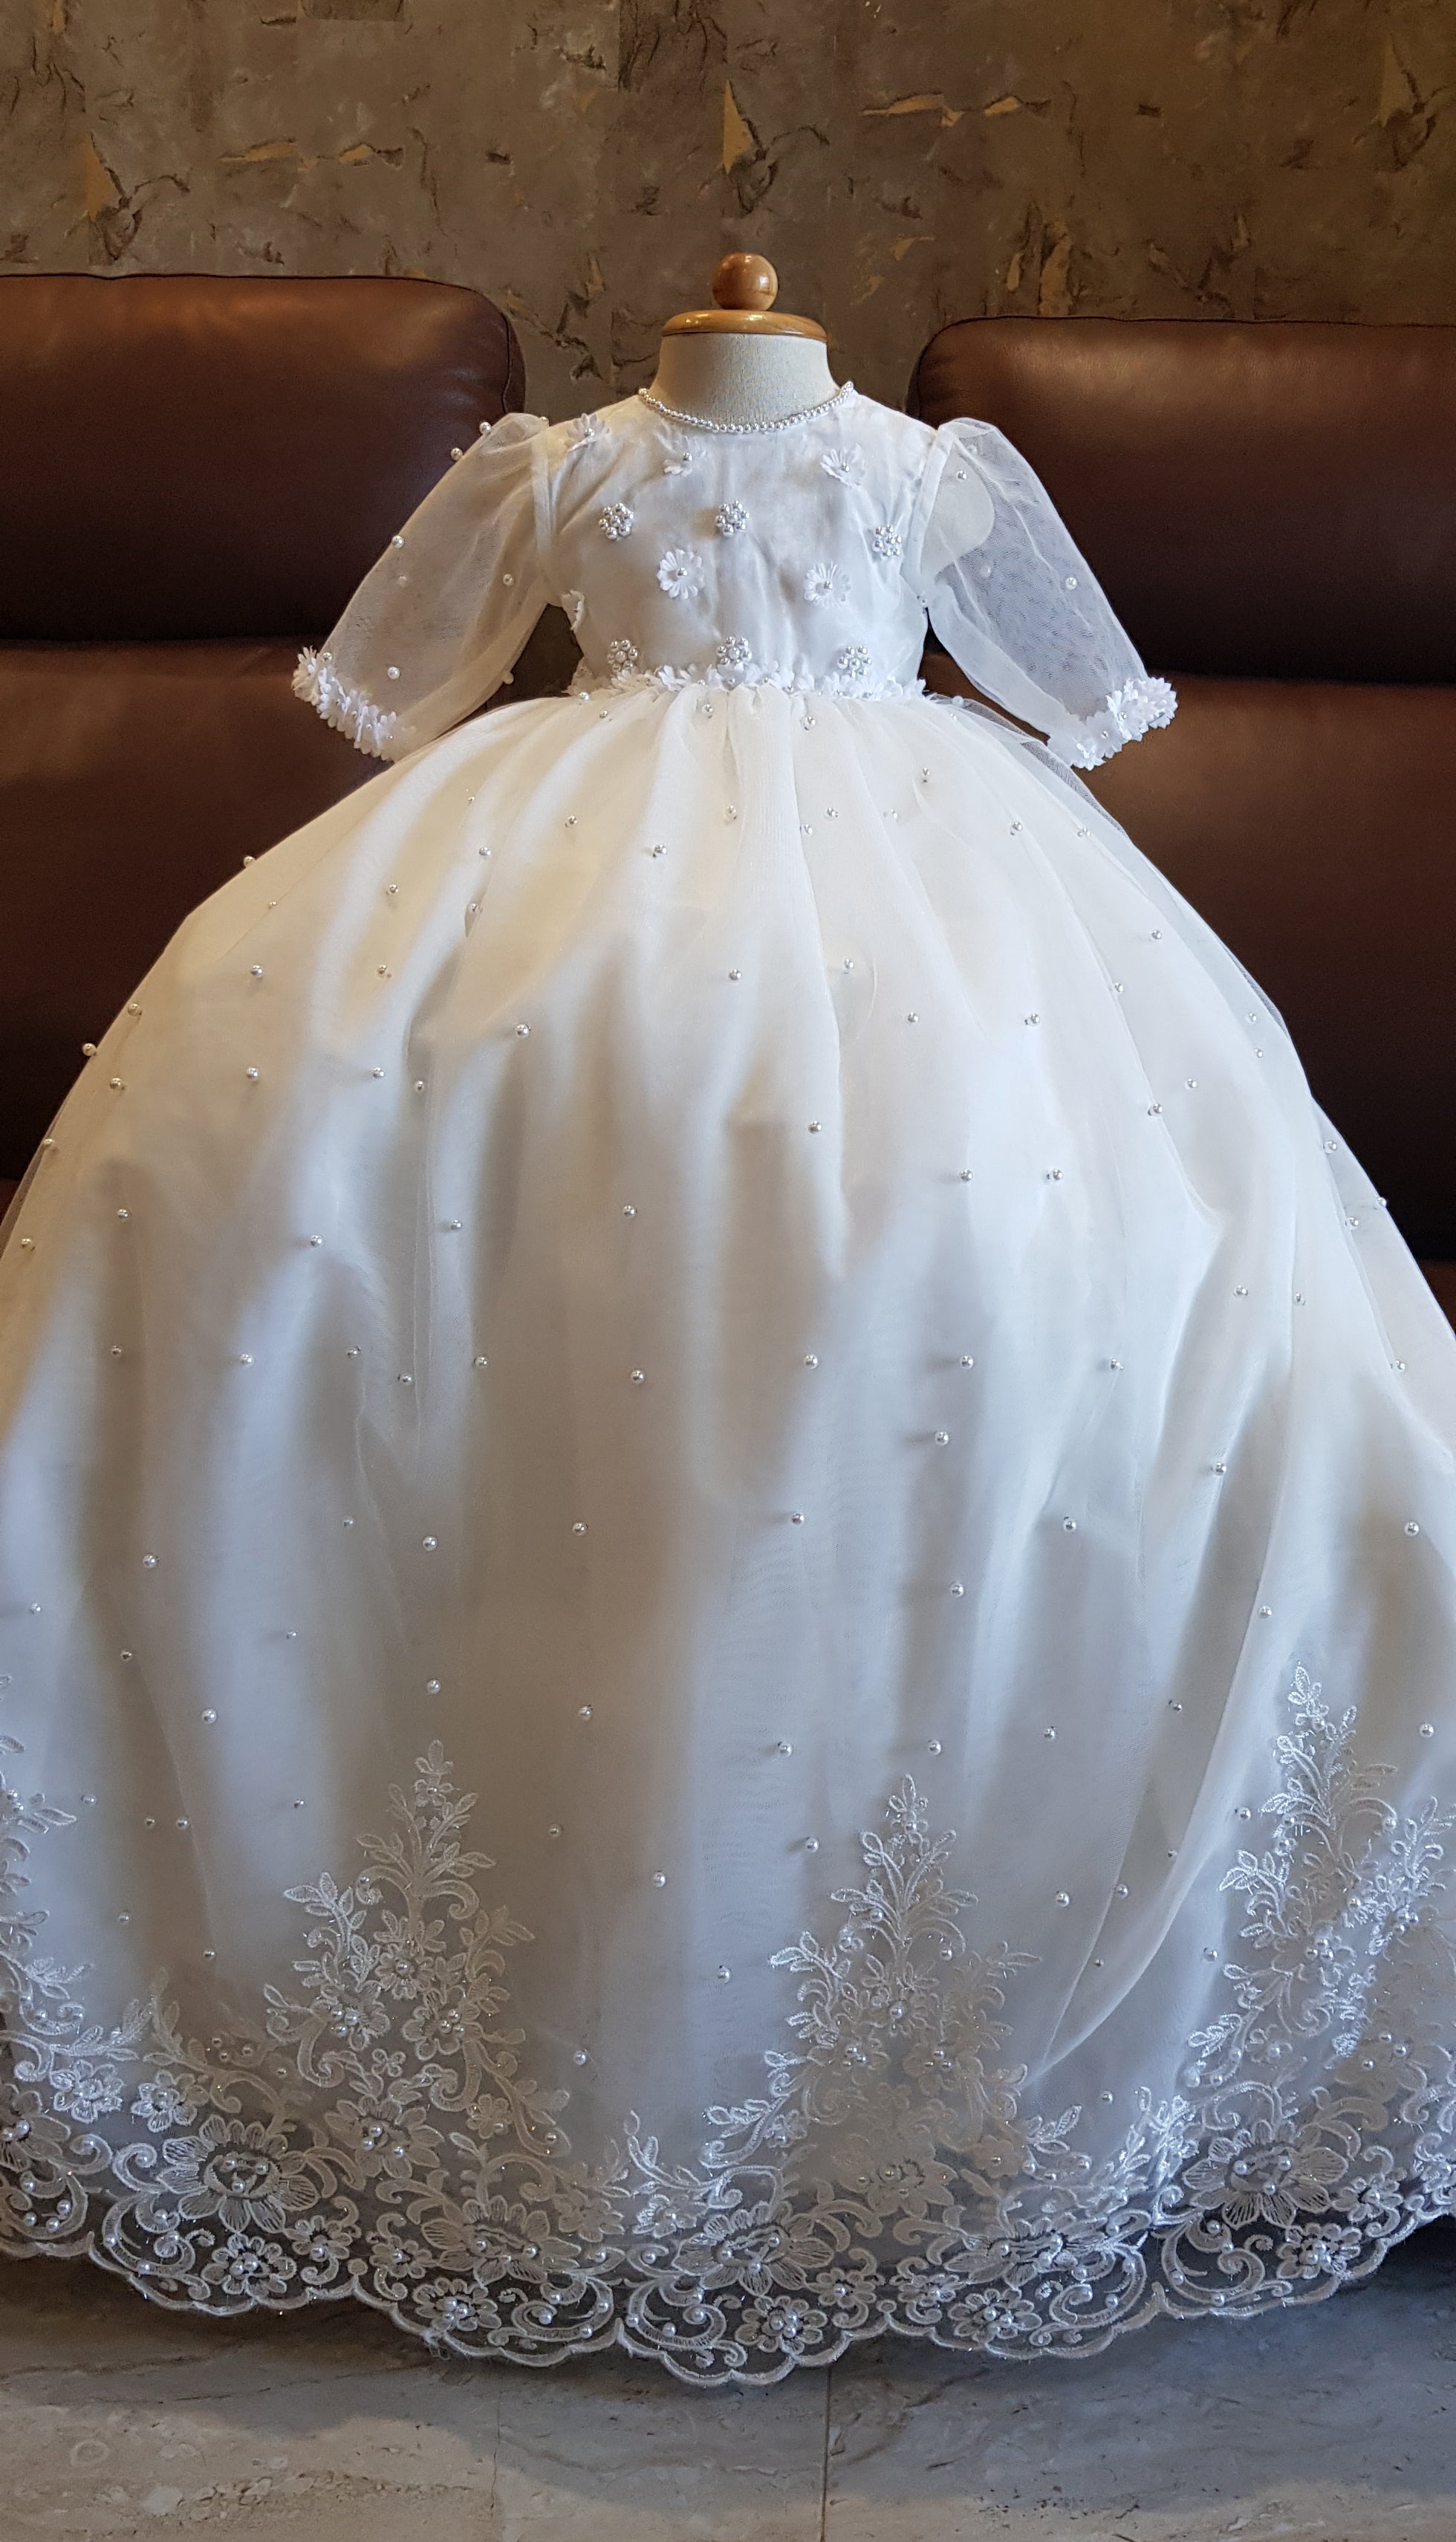 Choosing a Girl's Baptism Gown - One Small Child